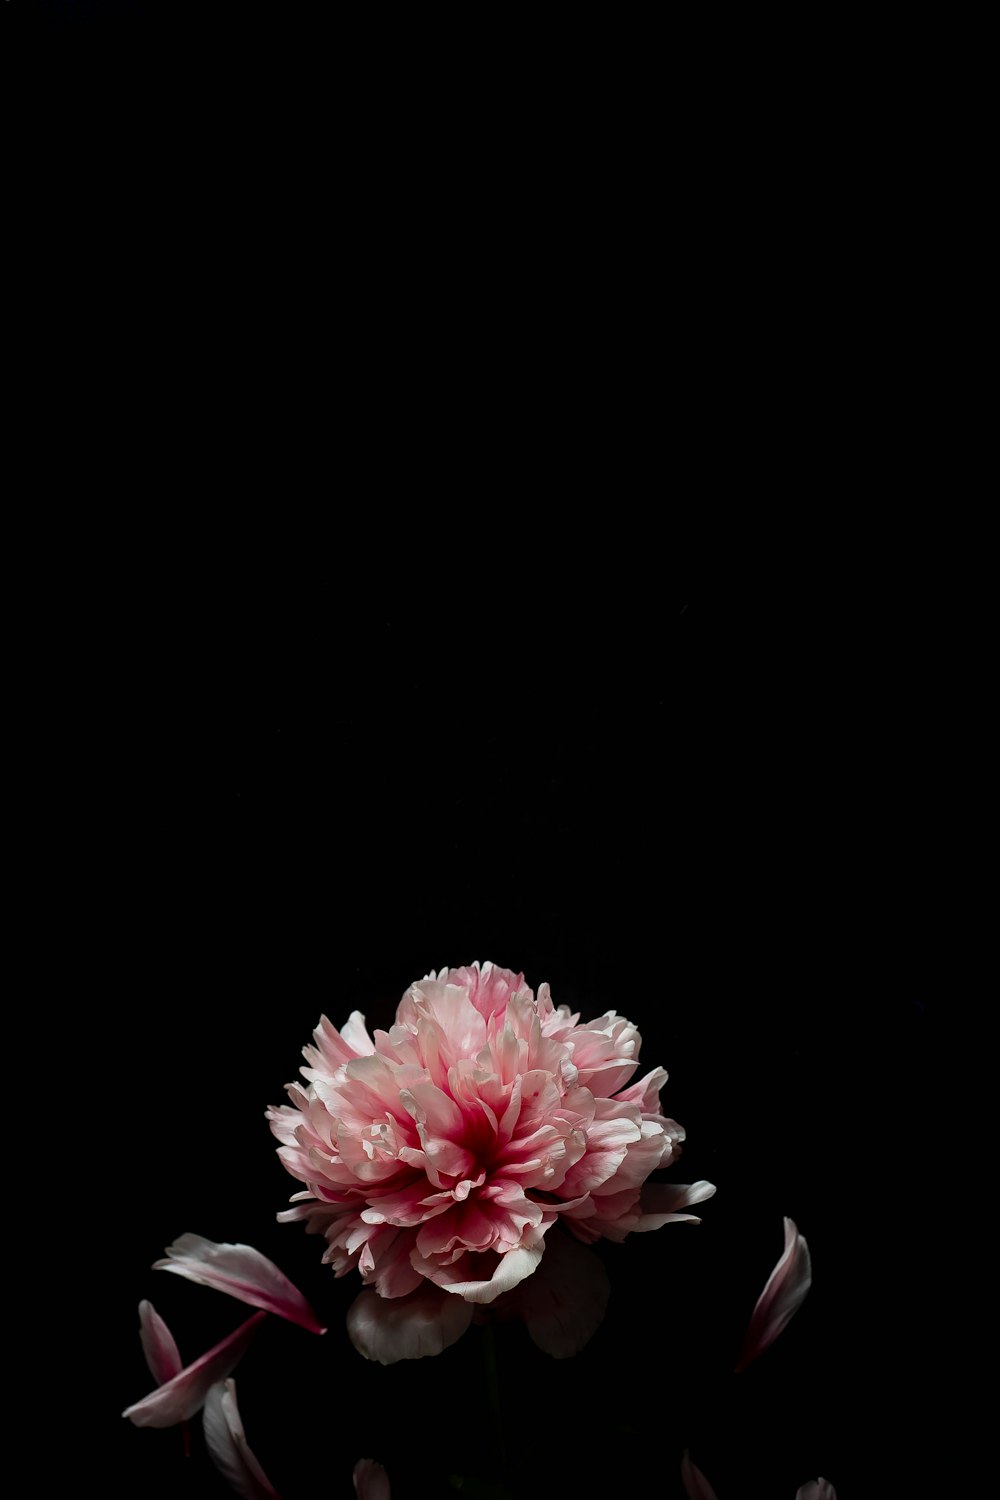 pink and white flower on black background